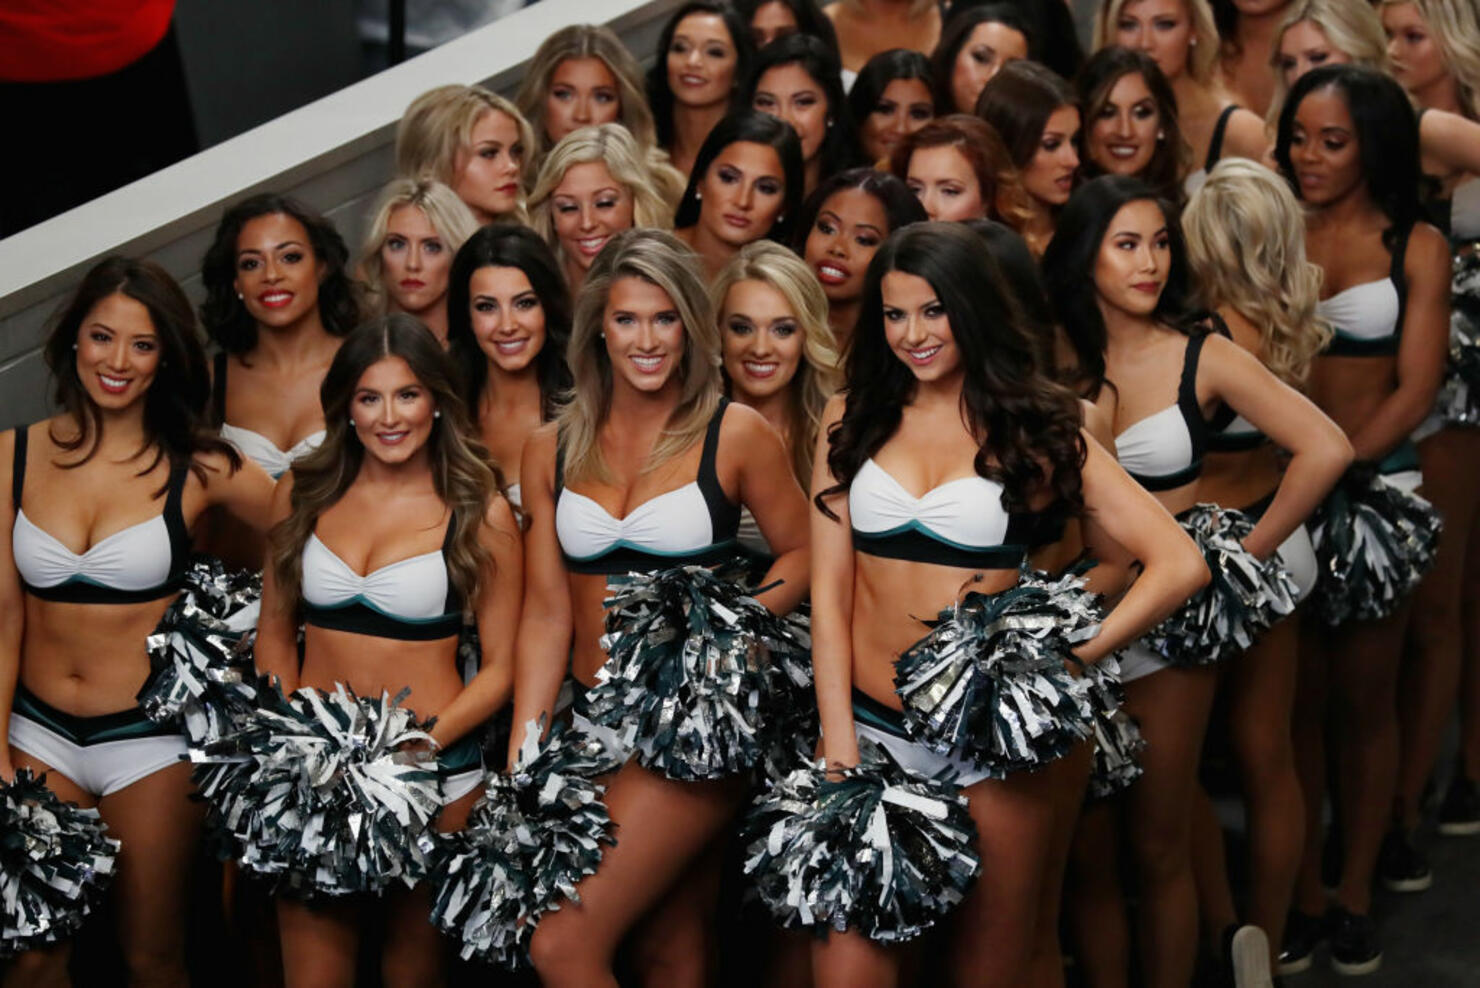 The Hottest Cheerleader From Each NFL Team